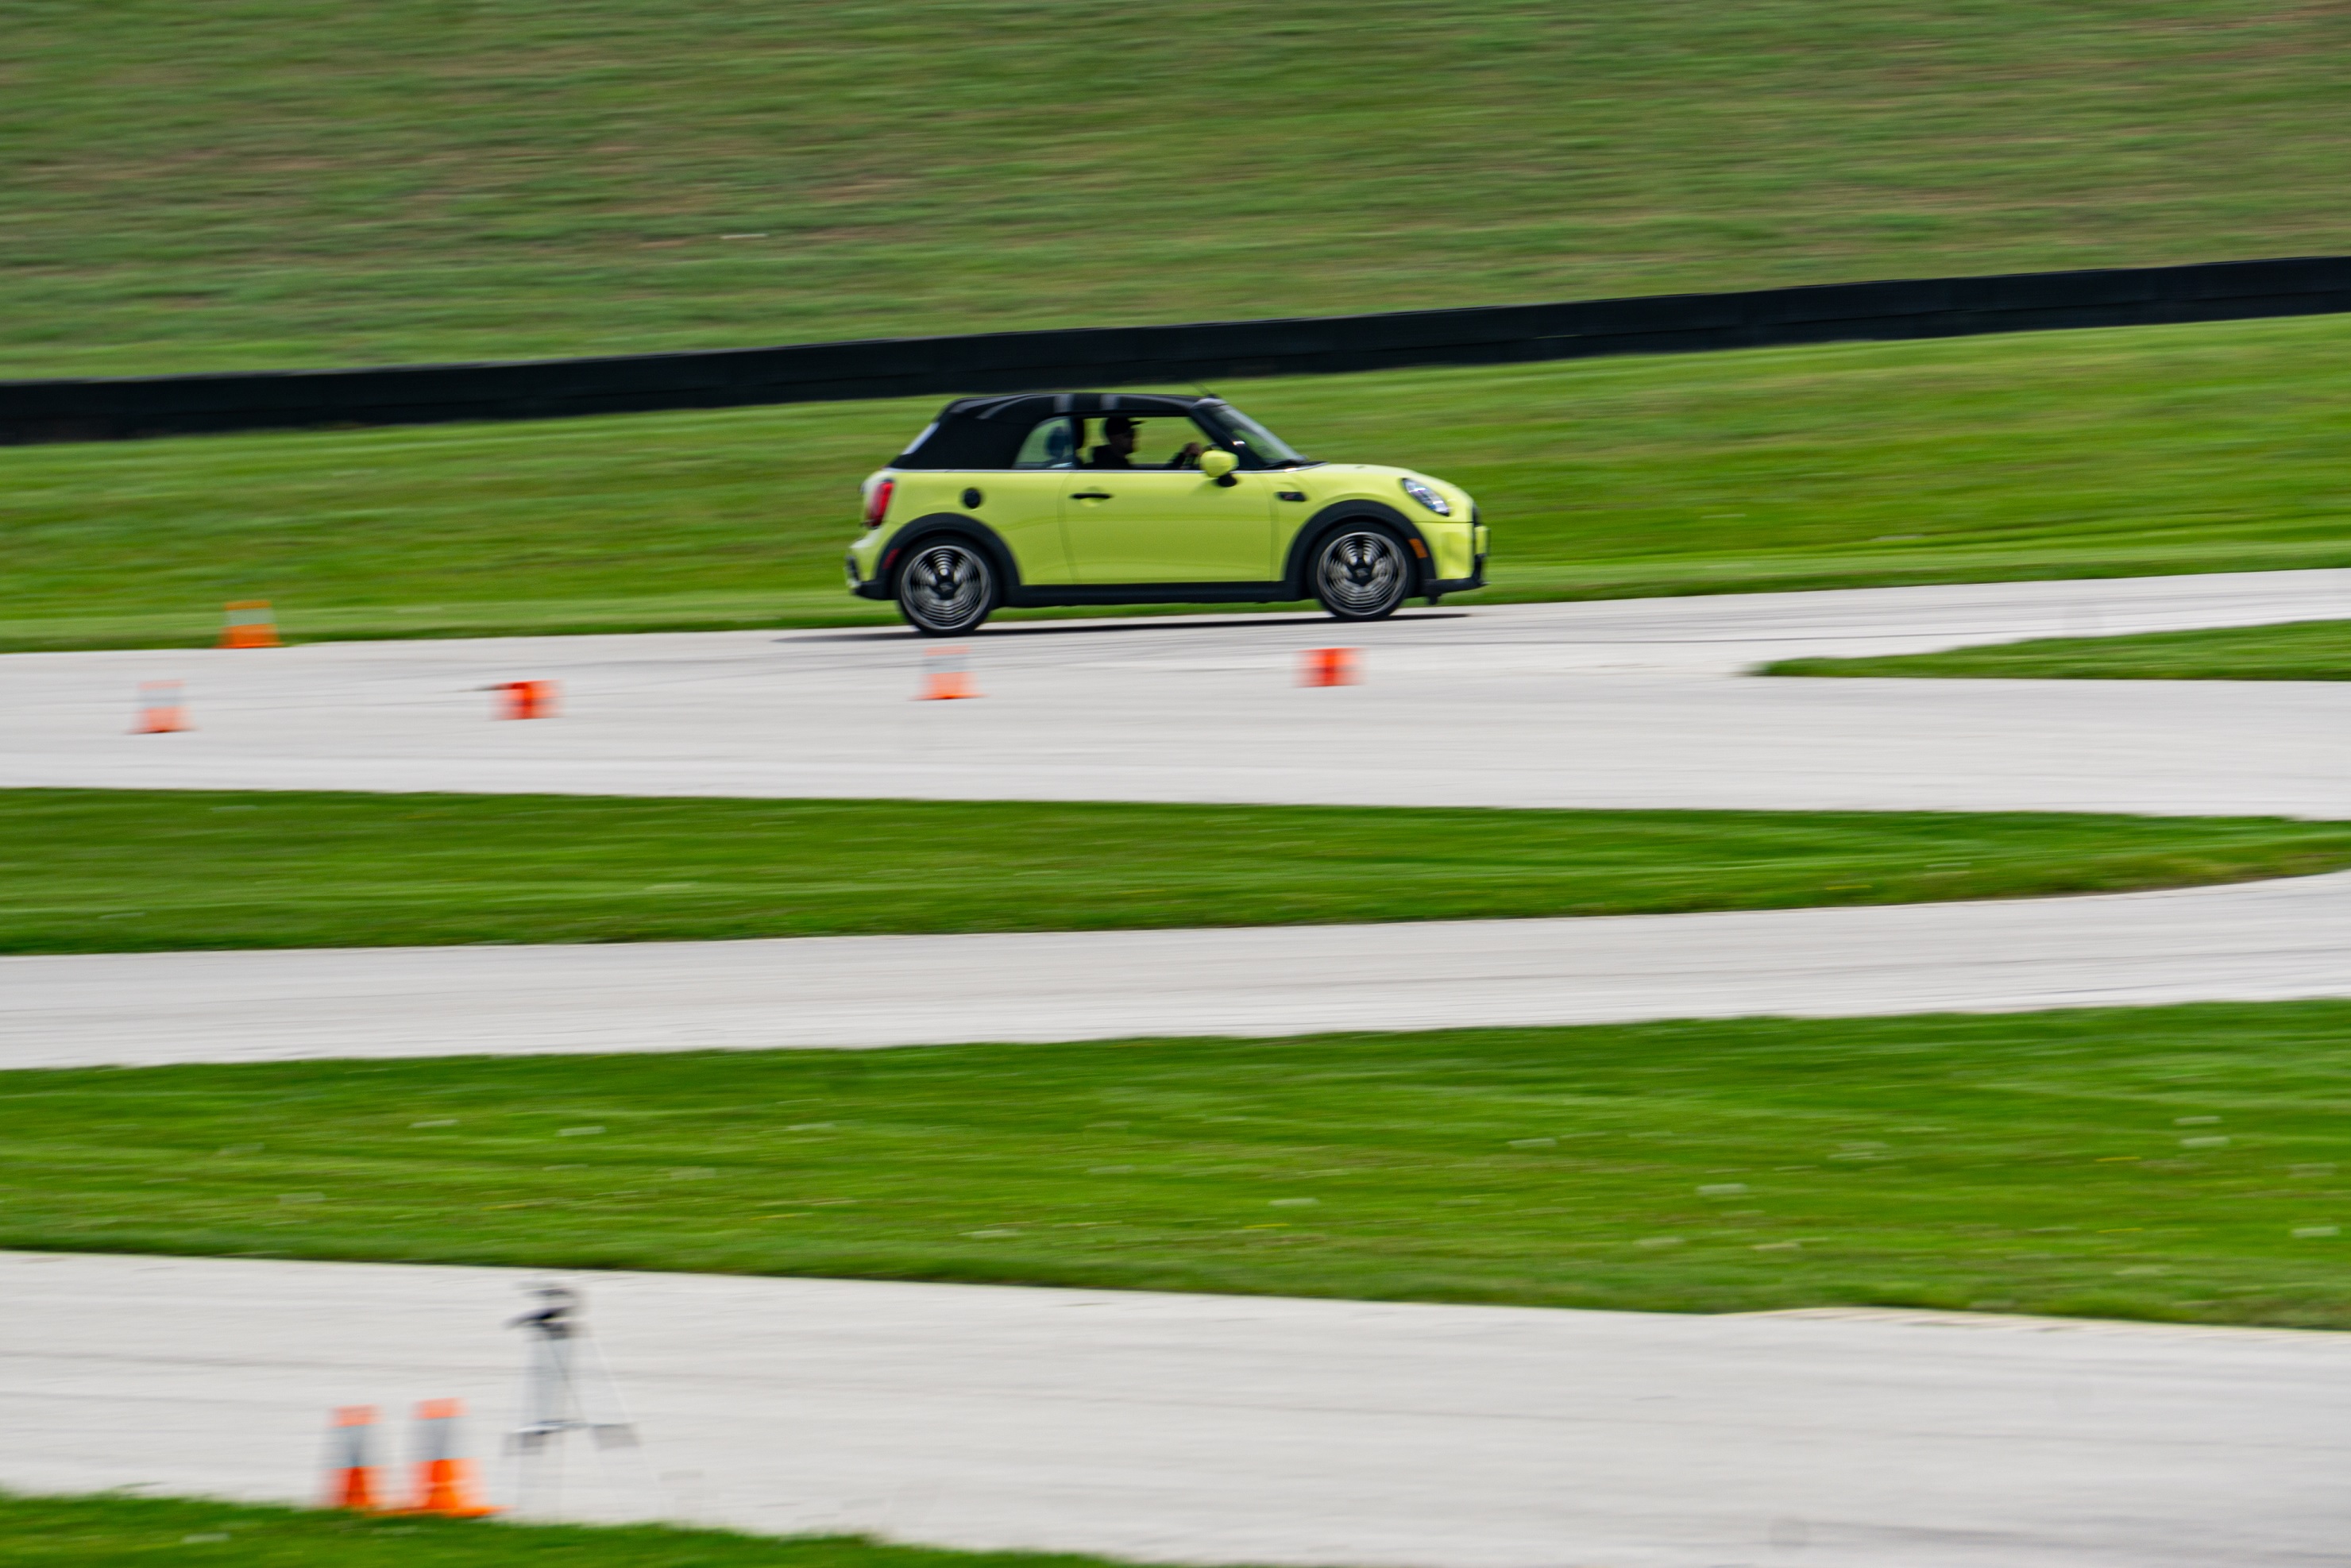 The side view of a yellow-green 2022 Mini Cooper S Convertible racing on Road America's autocross course